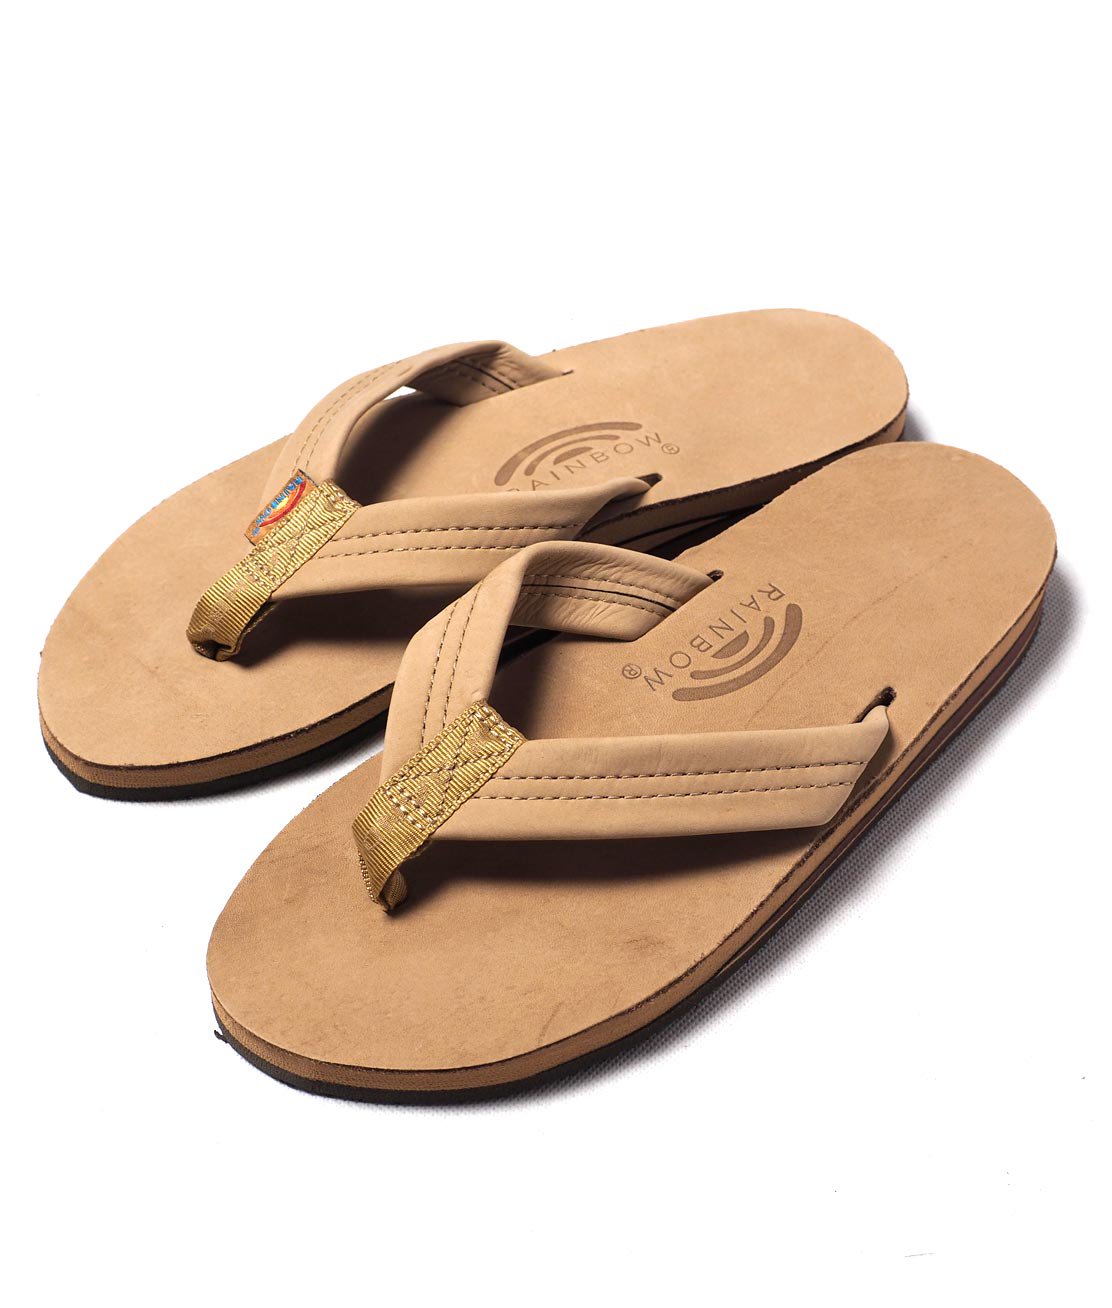 【RAINBOW SANDALS】DOUBLE LAYER PREMIER LEATHER - SIERRA BROWN サンダル - HUNKY  DORY